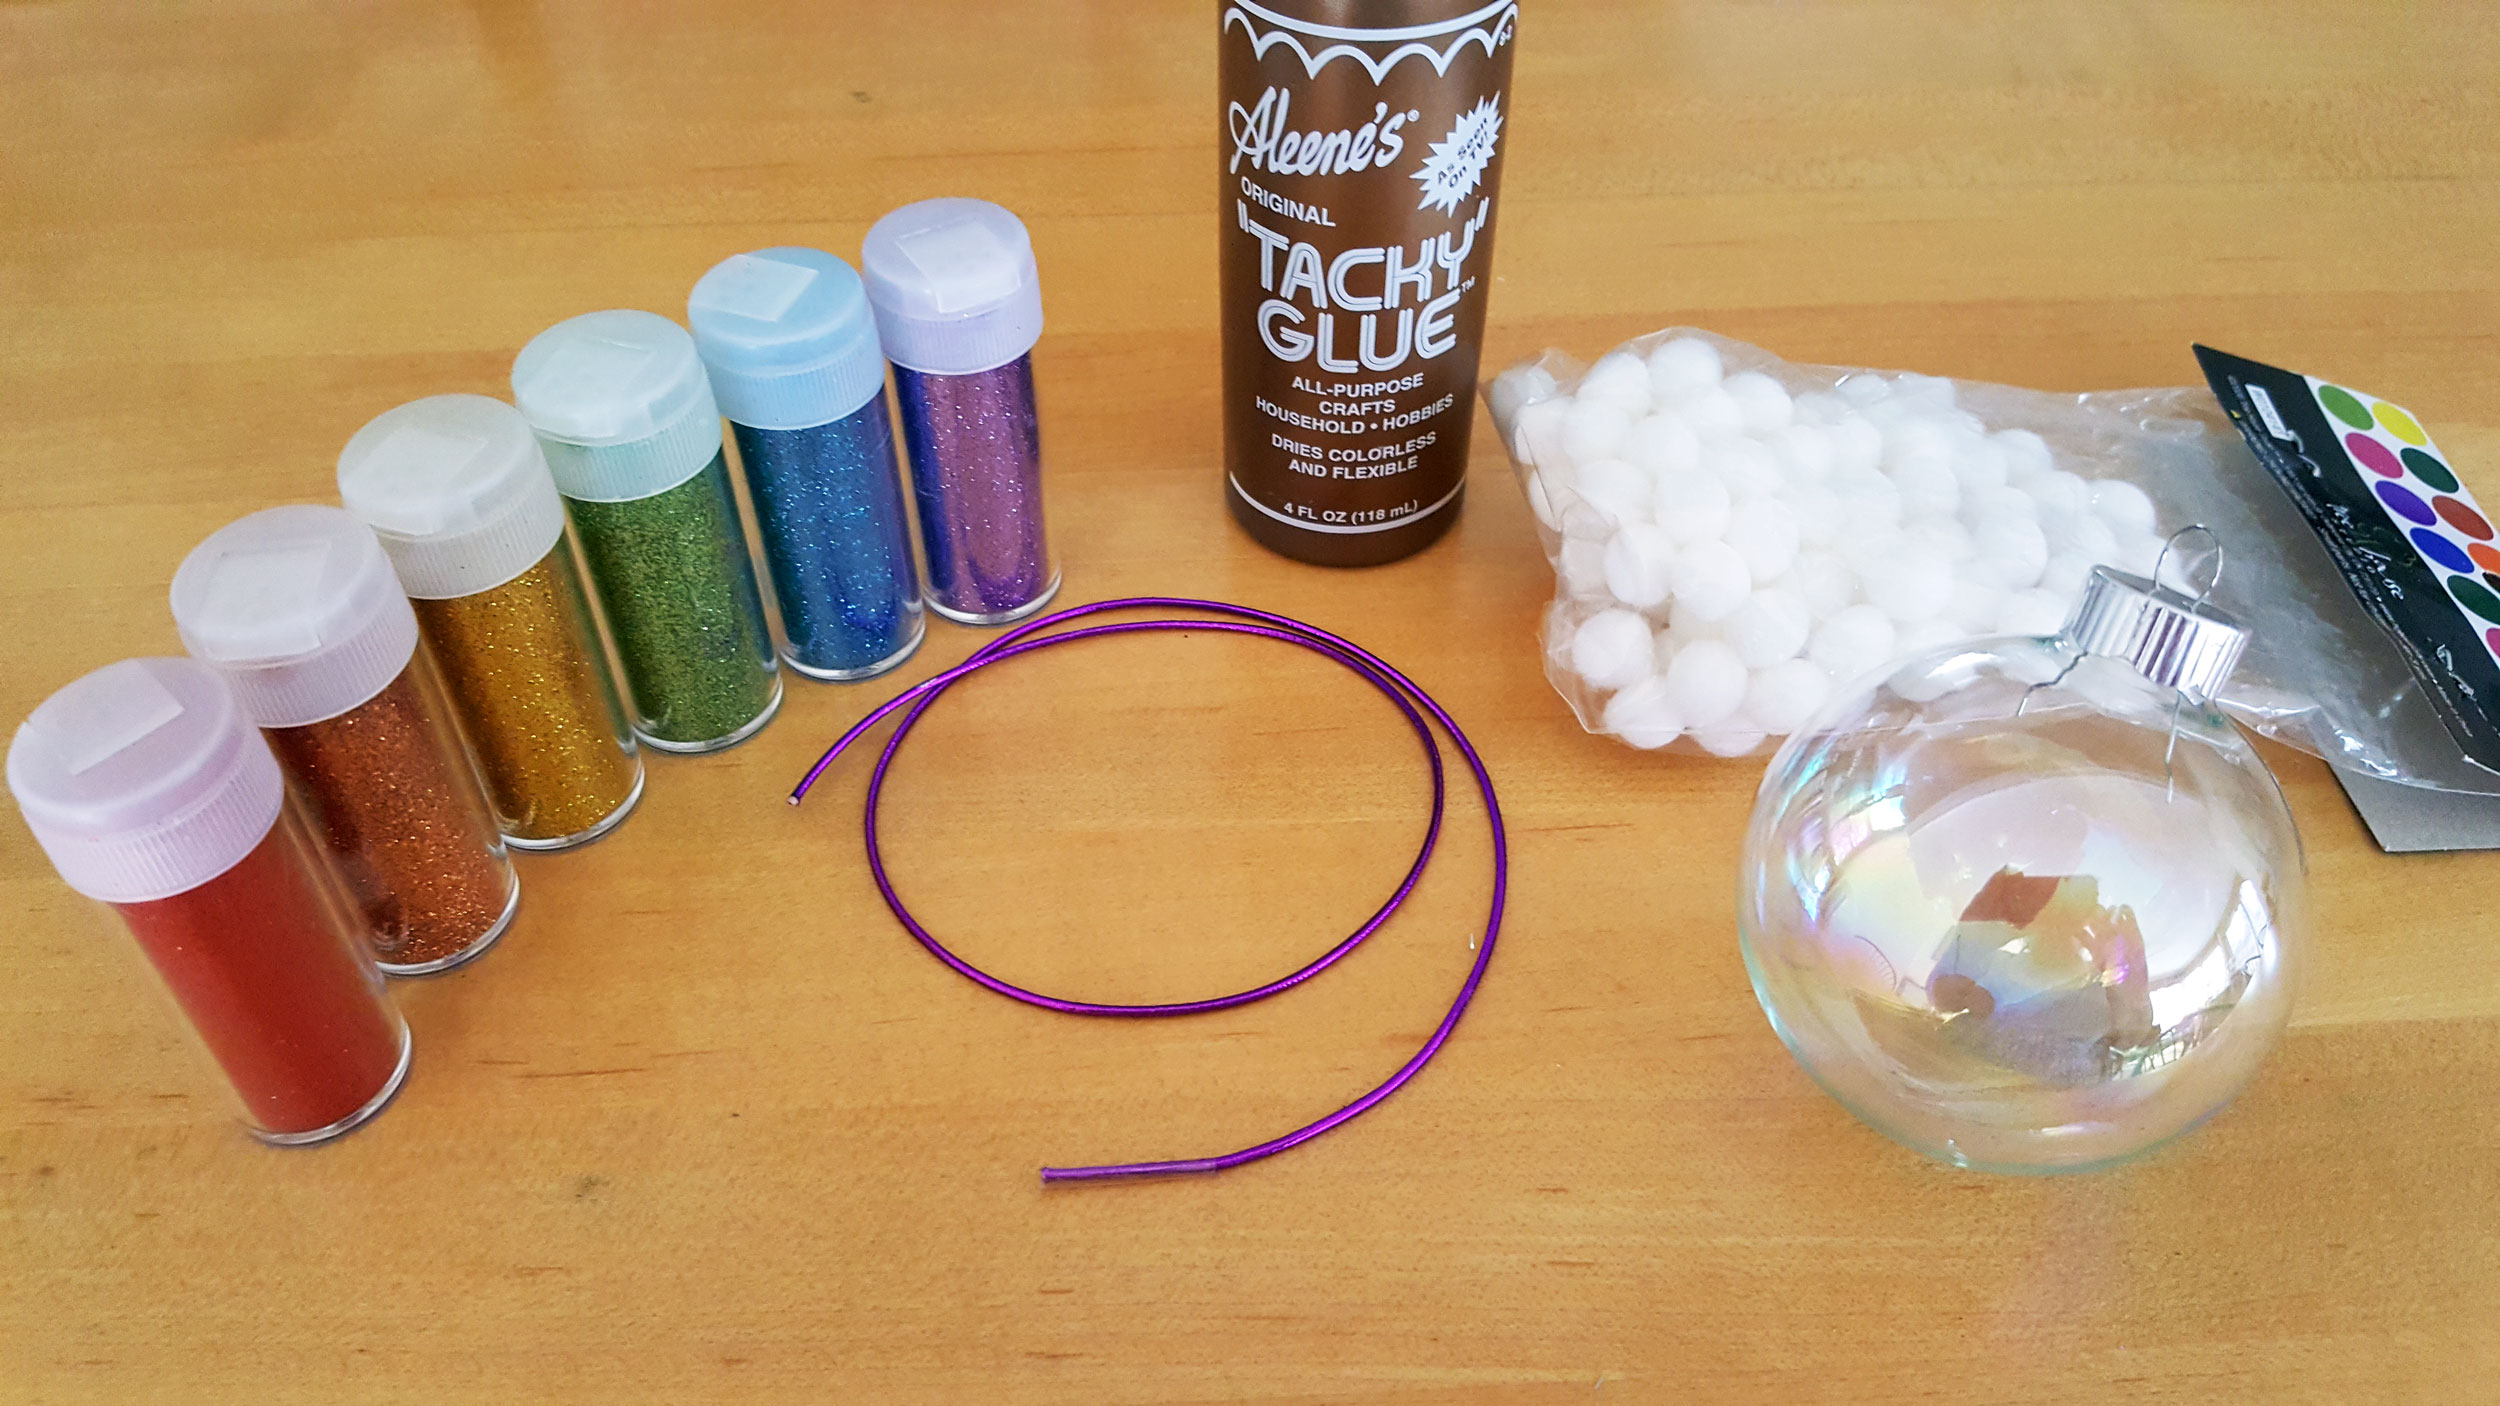 Supplies needed for the Glitter Rainbow Ornament: a Clear glass ball ornament, Rainbow colored glitter (Red, Orange, Yellow, Green, Blue, Violet), Glue, White pompoms or cotton balls, Ribbon or string, and Scissors | OrnamentShop.com